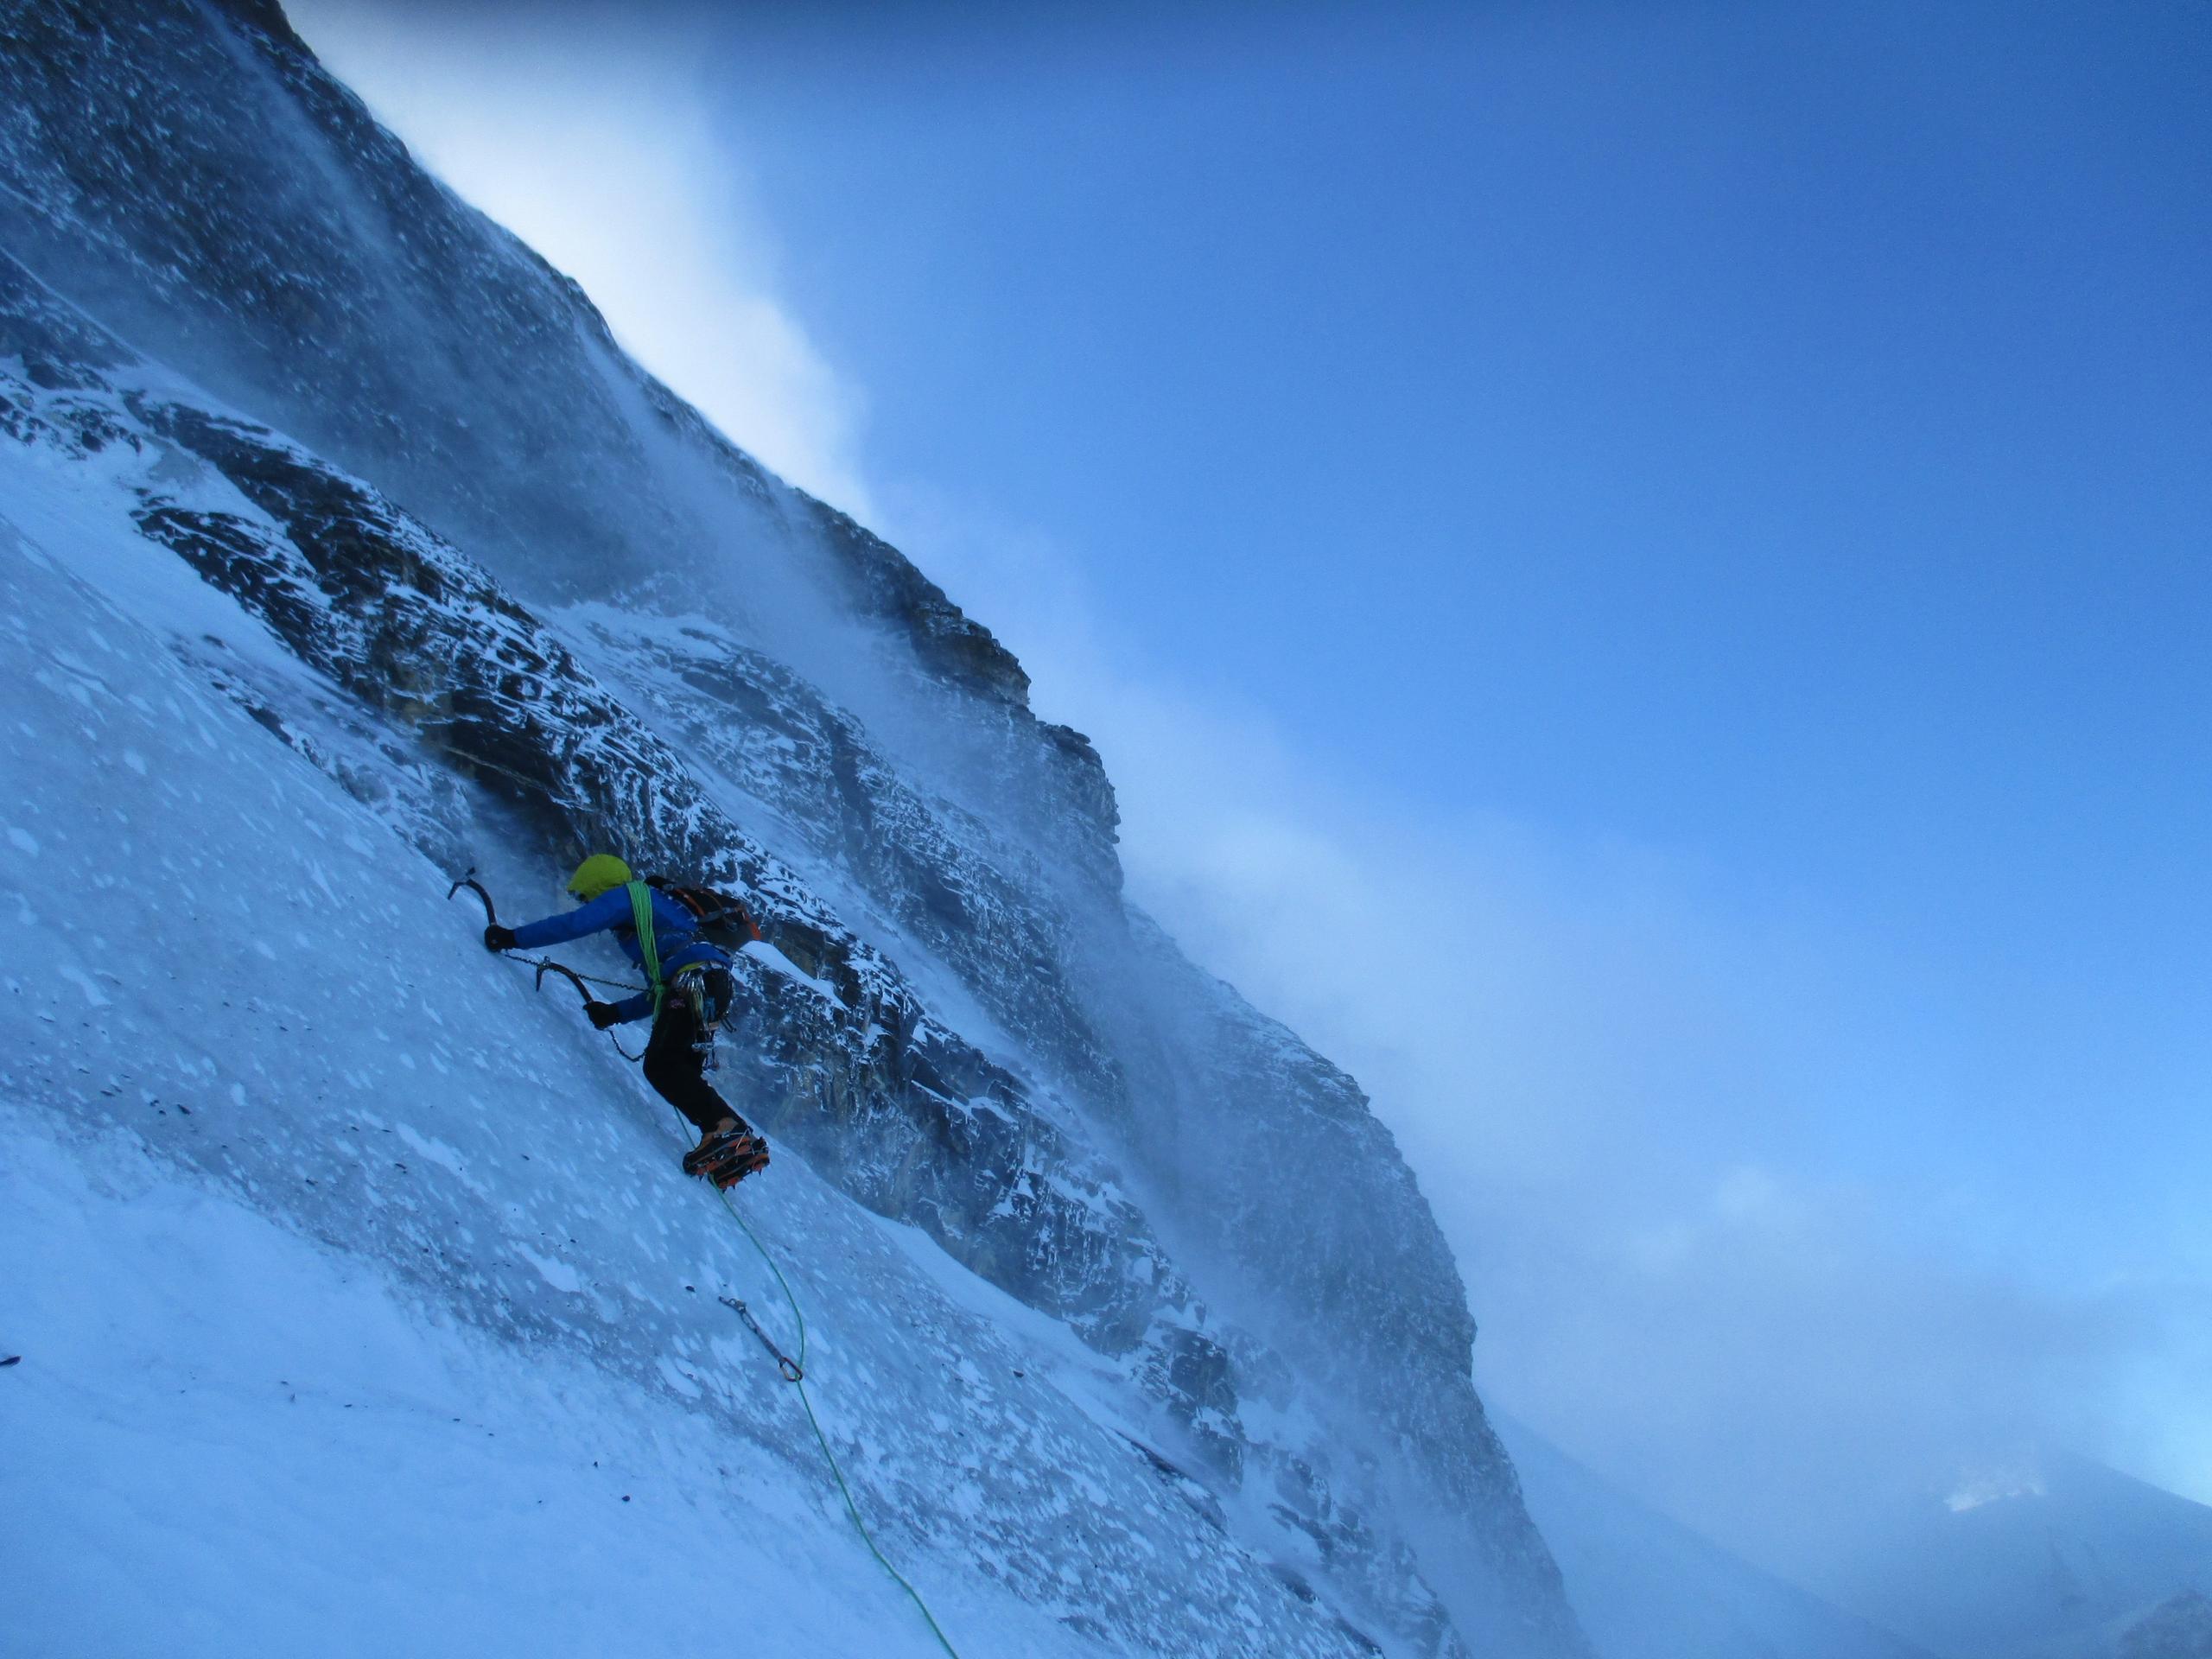 Climber on icy mountain face, climbing with two ice axes